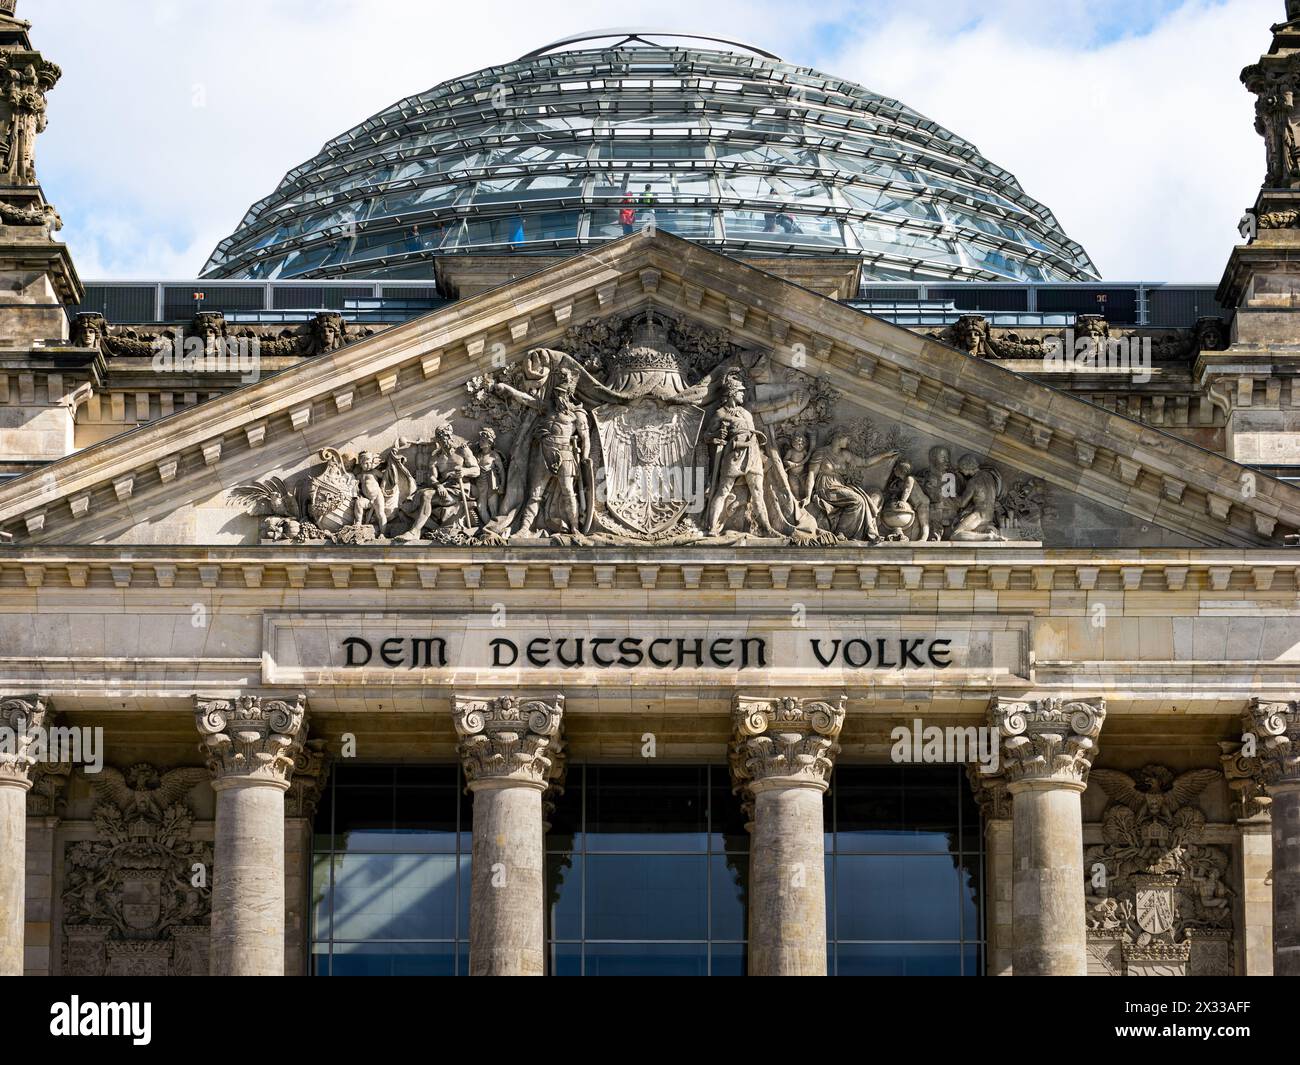 Reichstag building front with the inscription 'Dem Deutschen Volke'. Beautiful old architecture with a glass dome as governmental building. Stock Photo